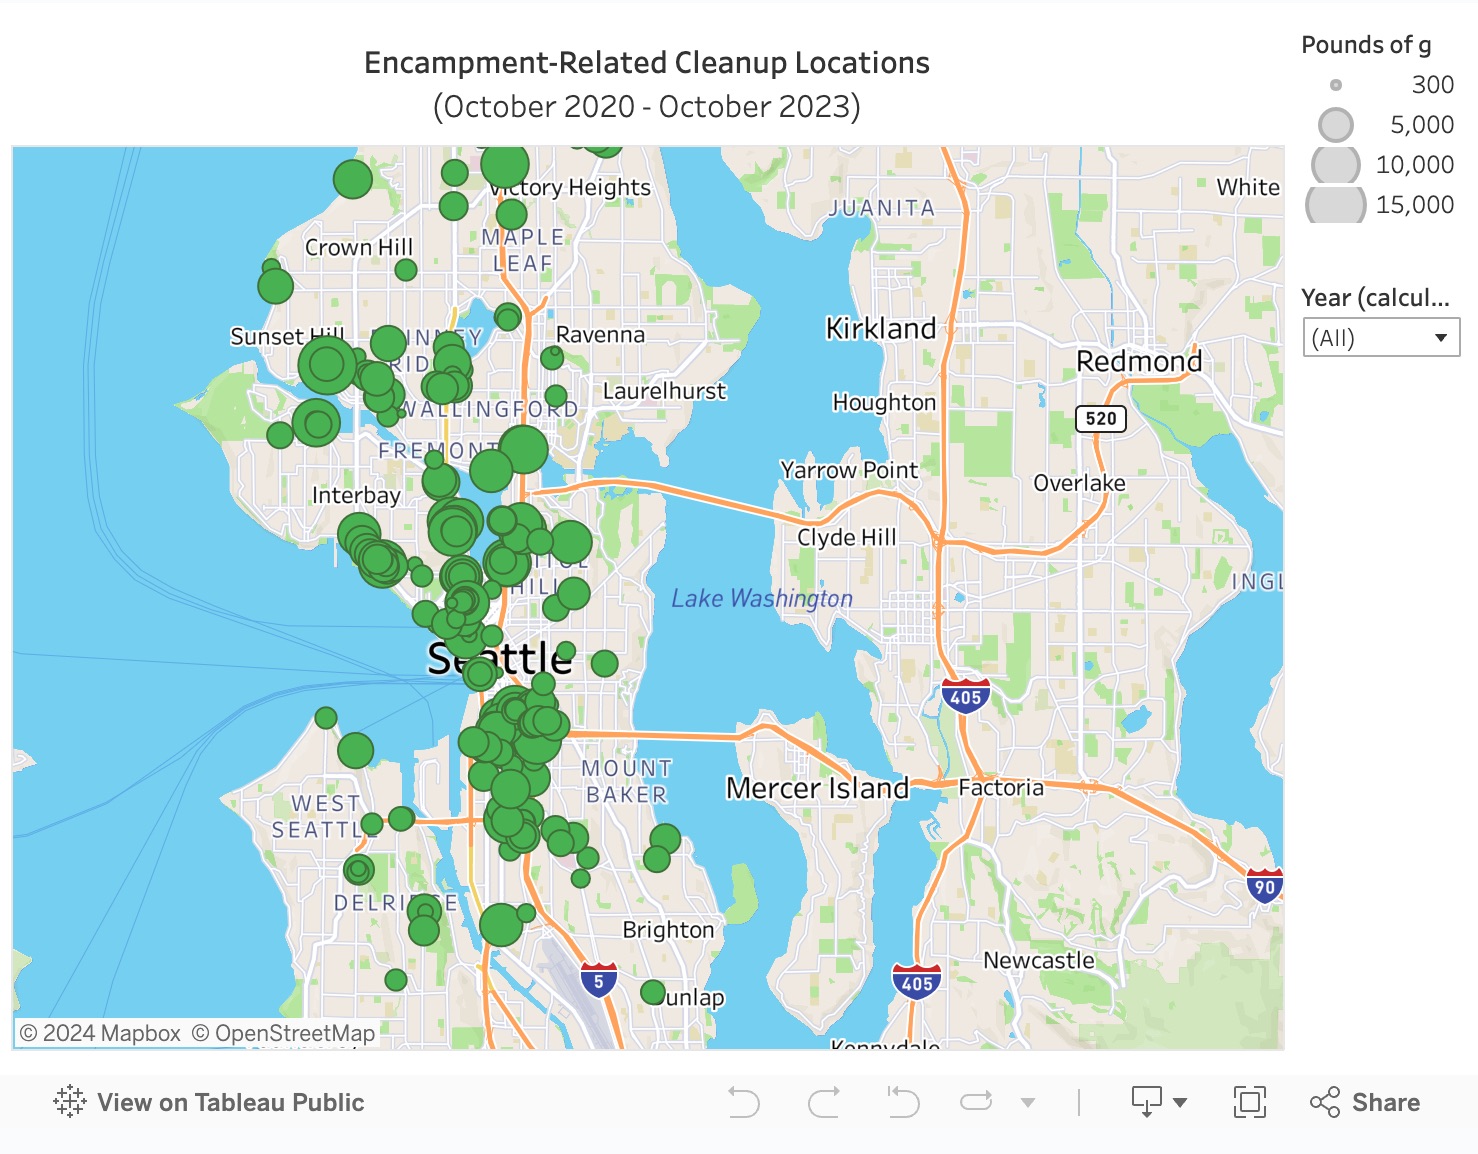 We Heart Seattle releases new data revealing 315 encampment-related cleanups over three years across Seattle